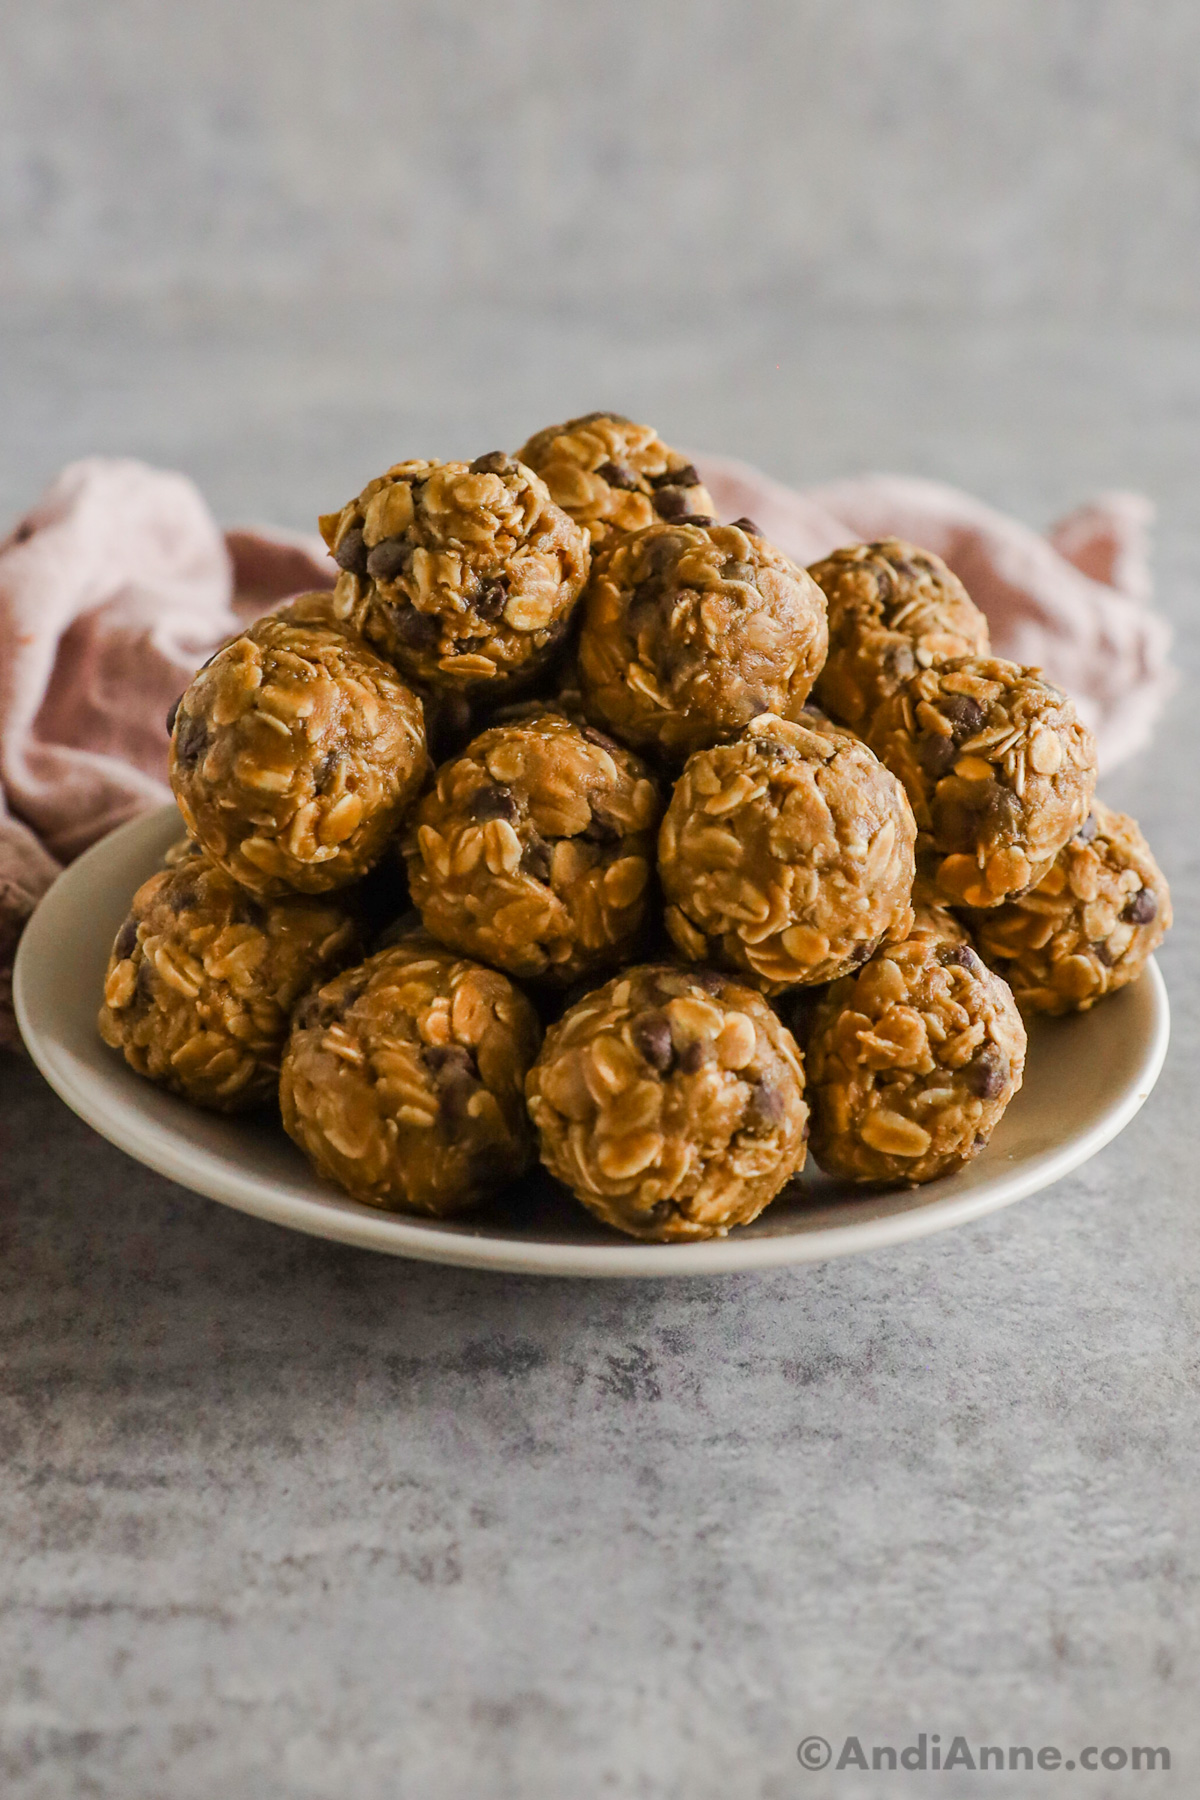 A pile of chocolate chip peanut butter oat balls on a plate.